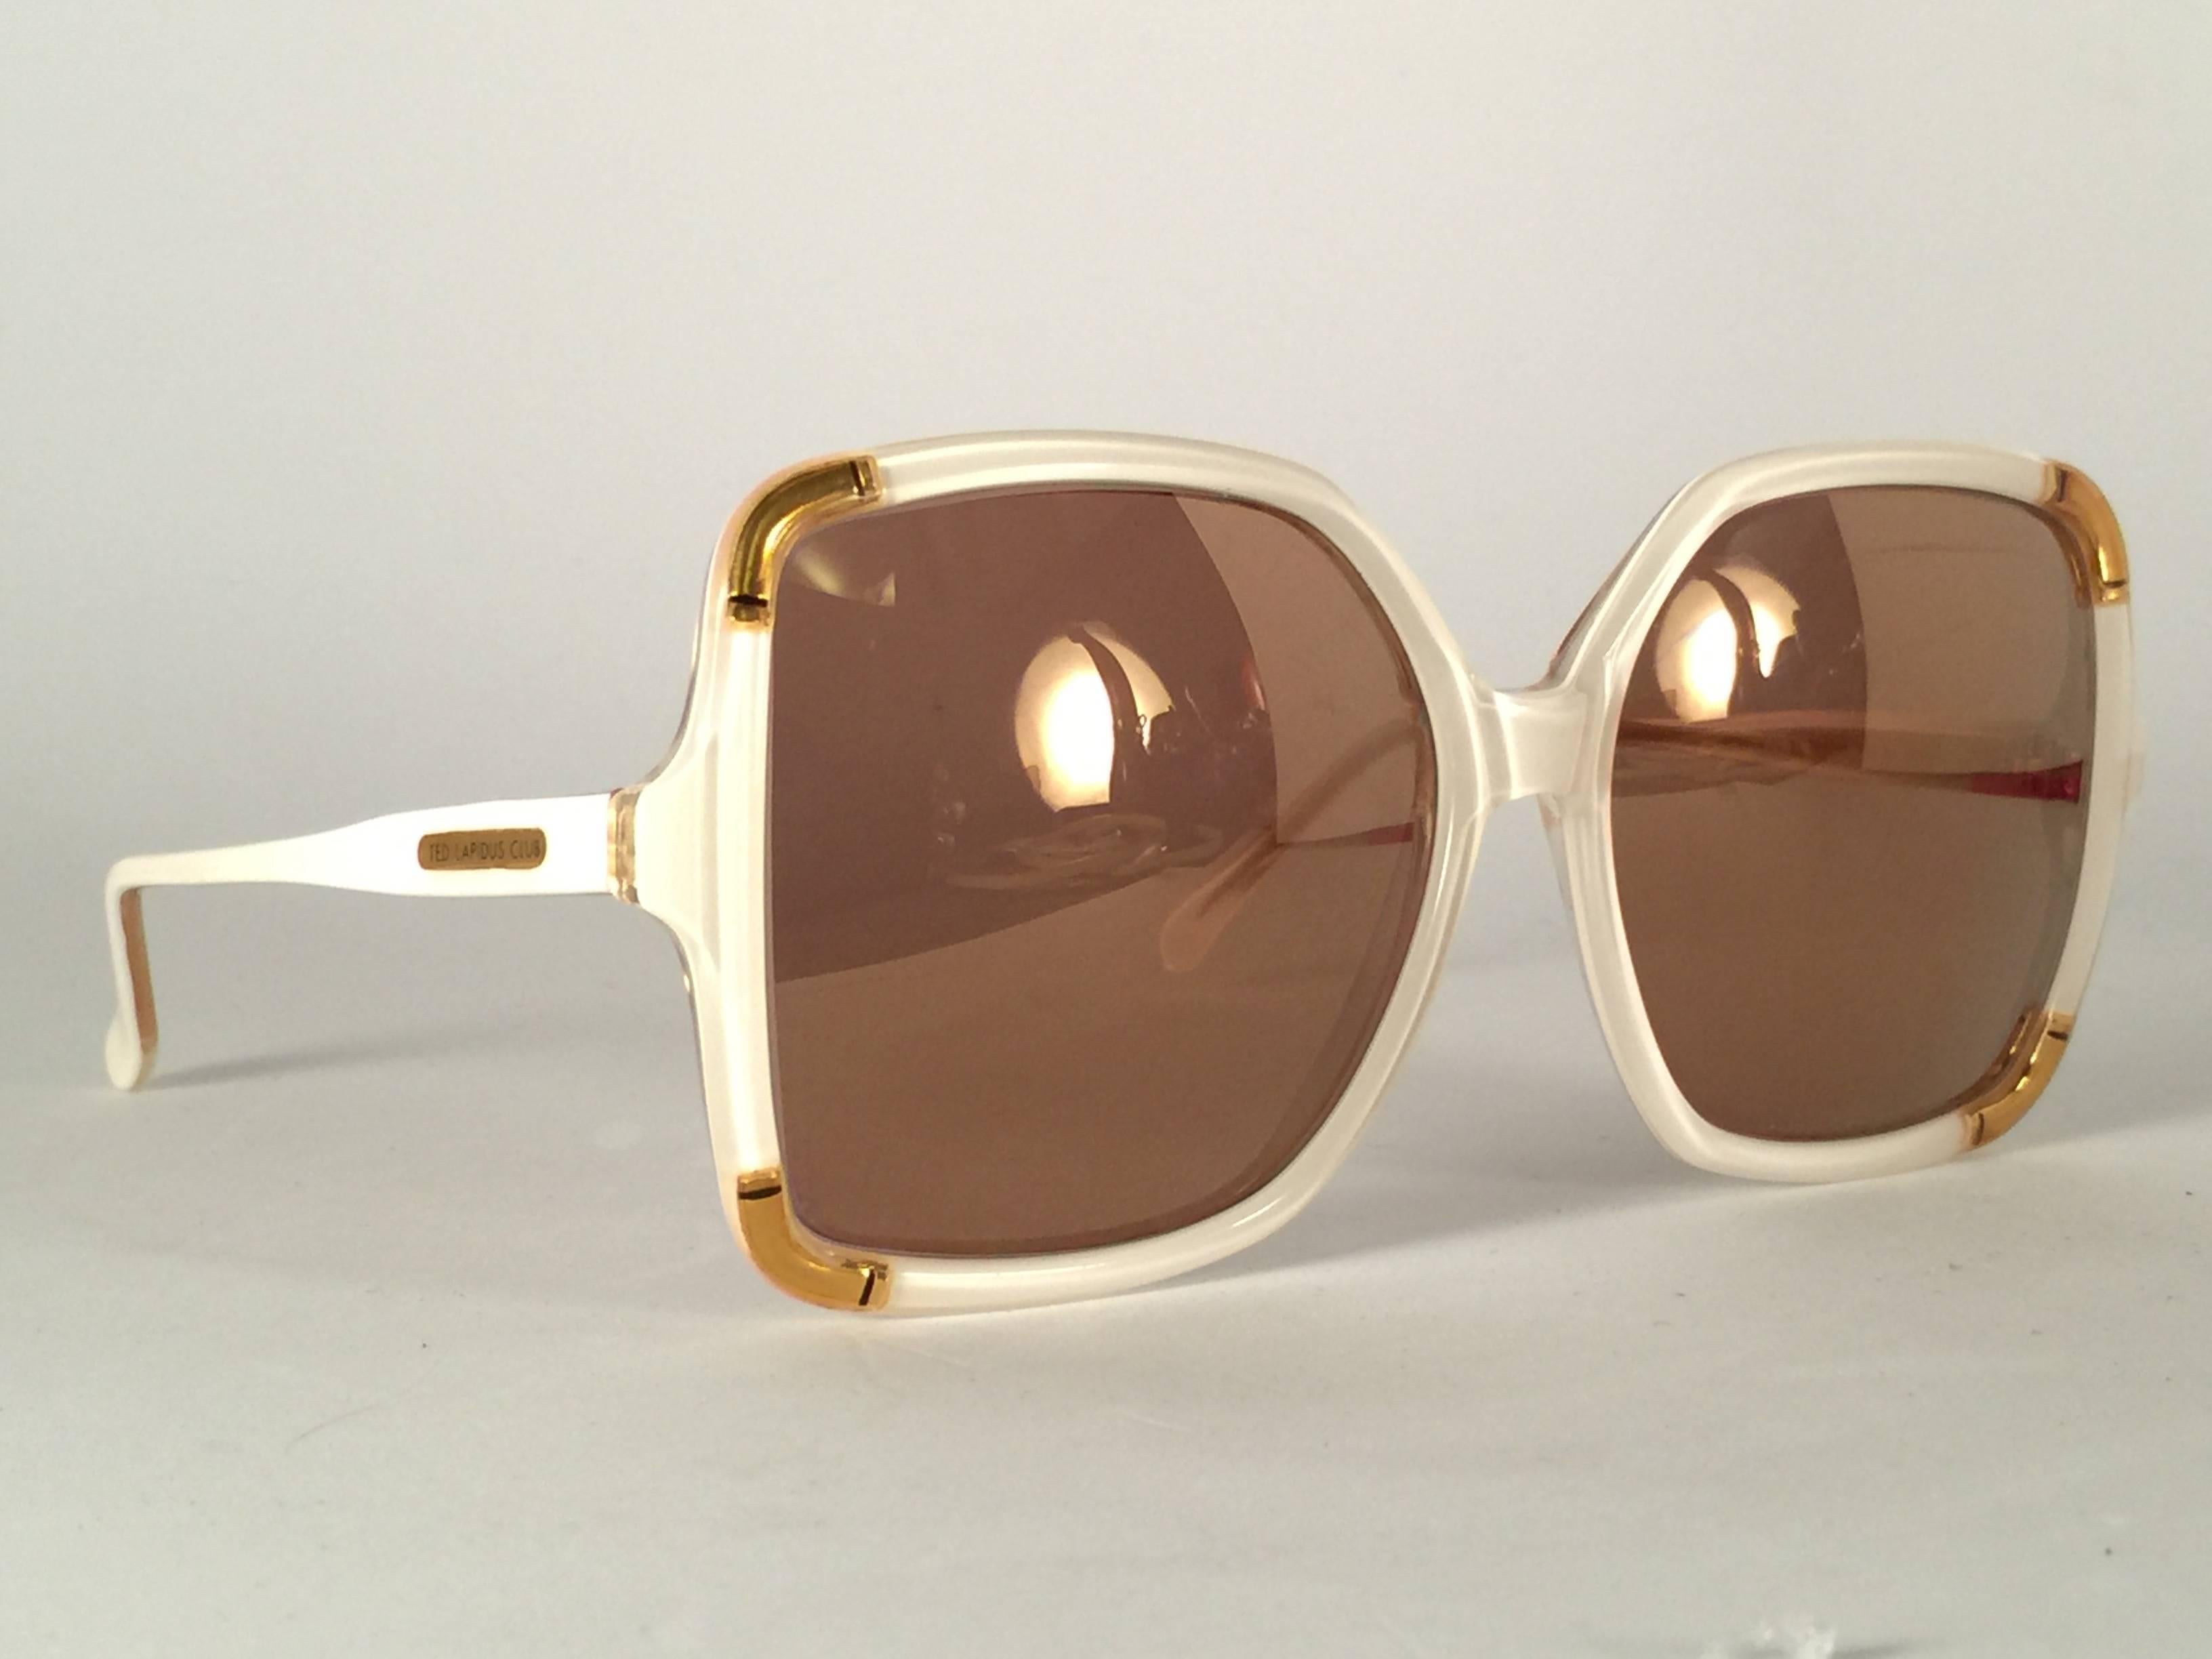 New Vintage Ted Lapidus Black & gold frame with spotless gold mirror lenses. Please consider that this item its nearly 50 years old and could show minor sign of wear or discolouration due to storage. 

Made in Paris. Produced and design in 1970's.